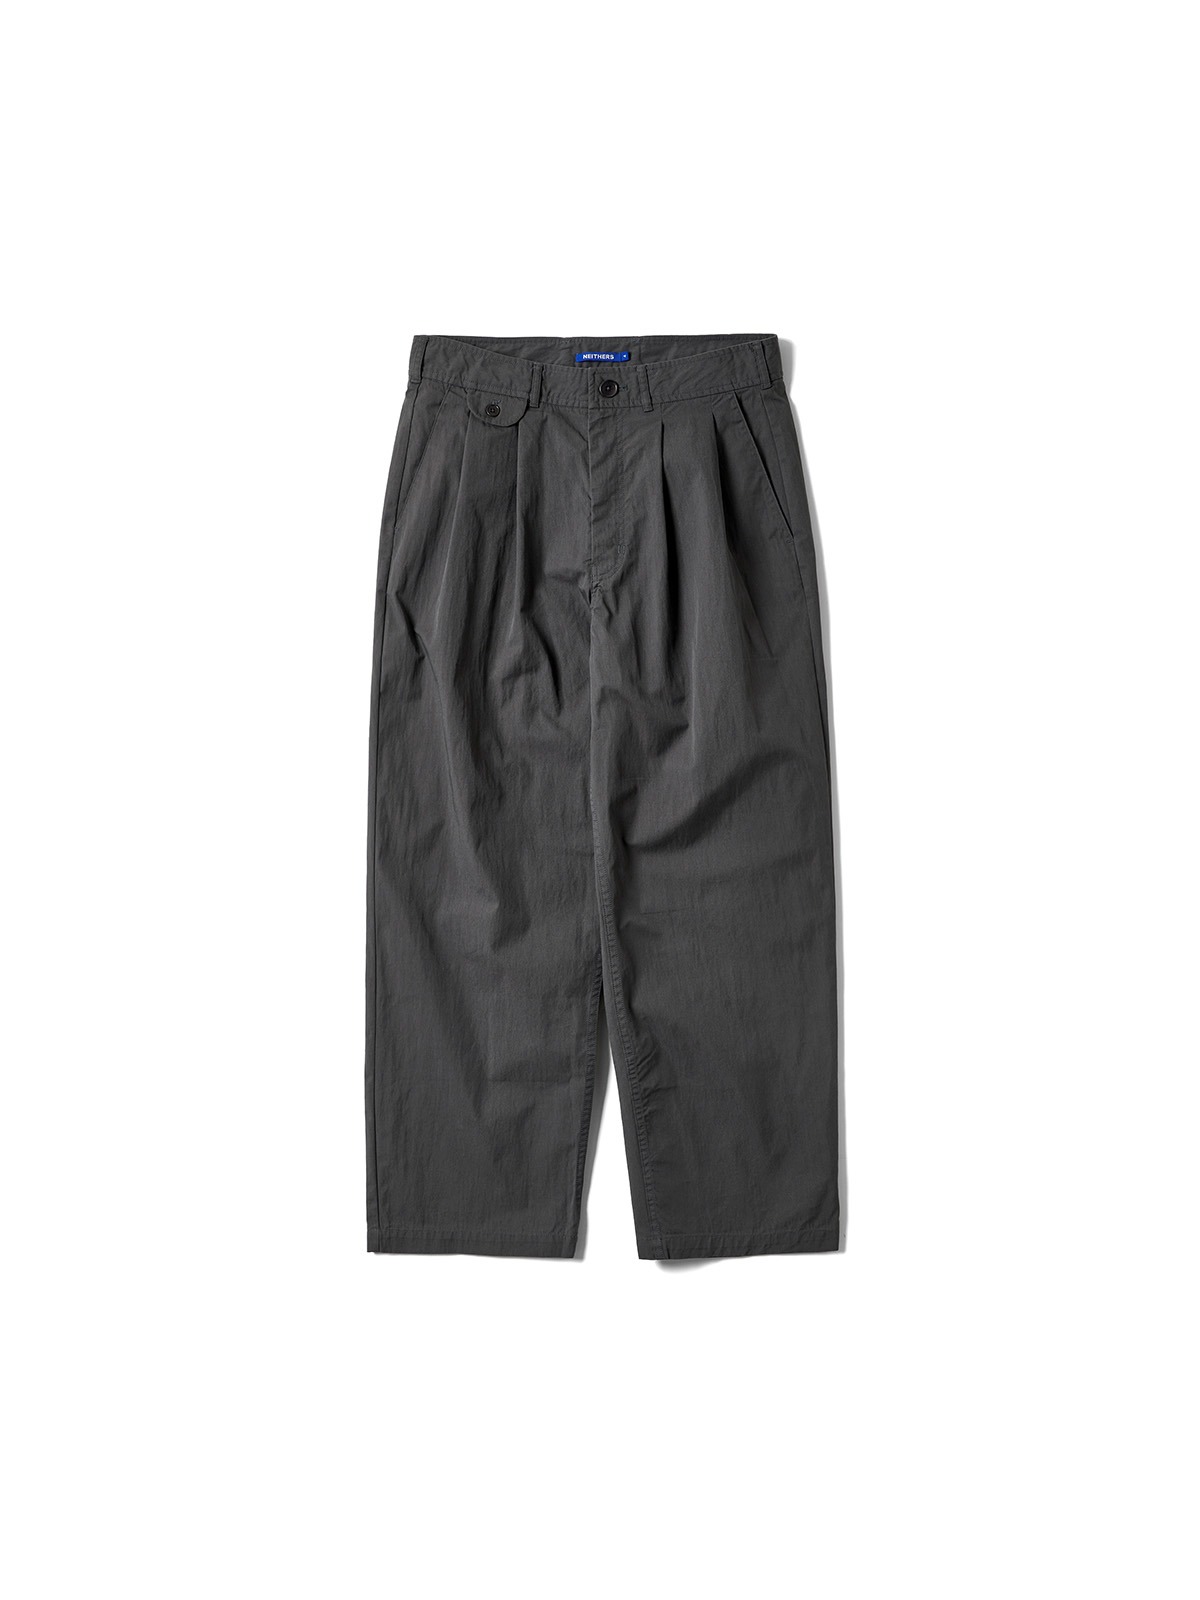 Loose Tapered Allen Pants (Charcoal)